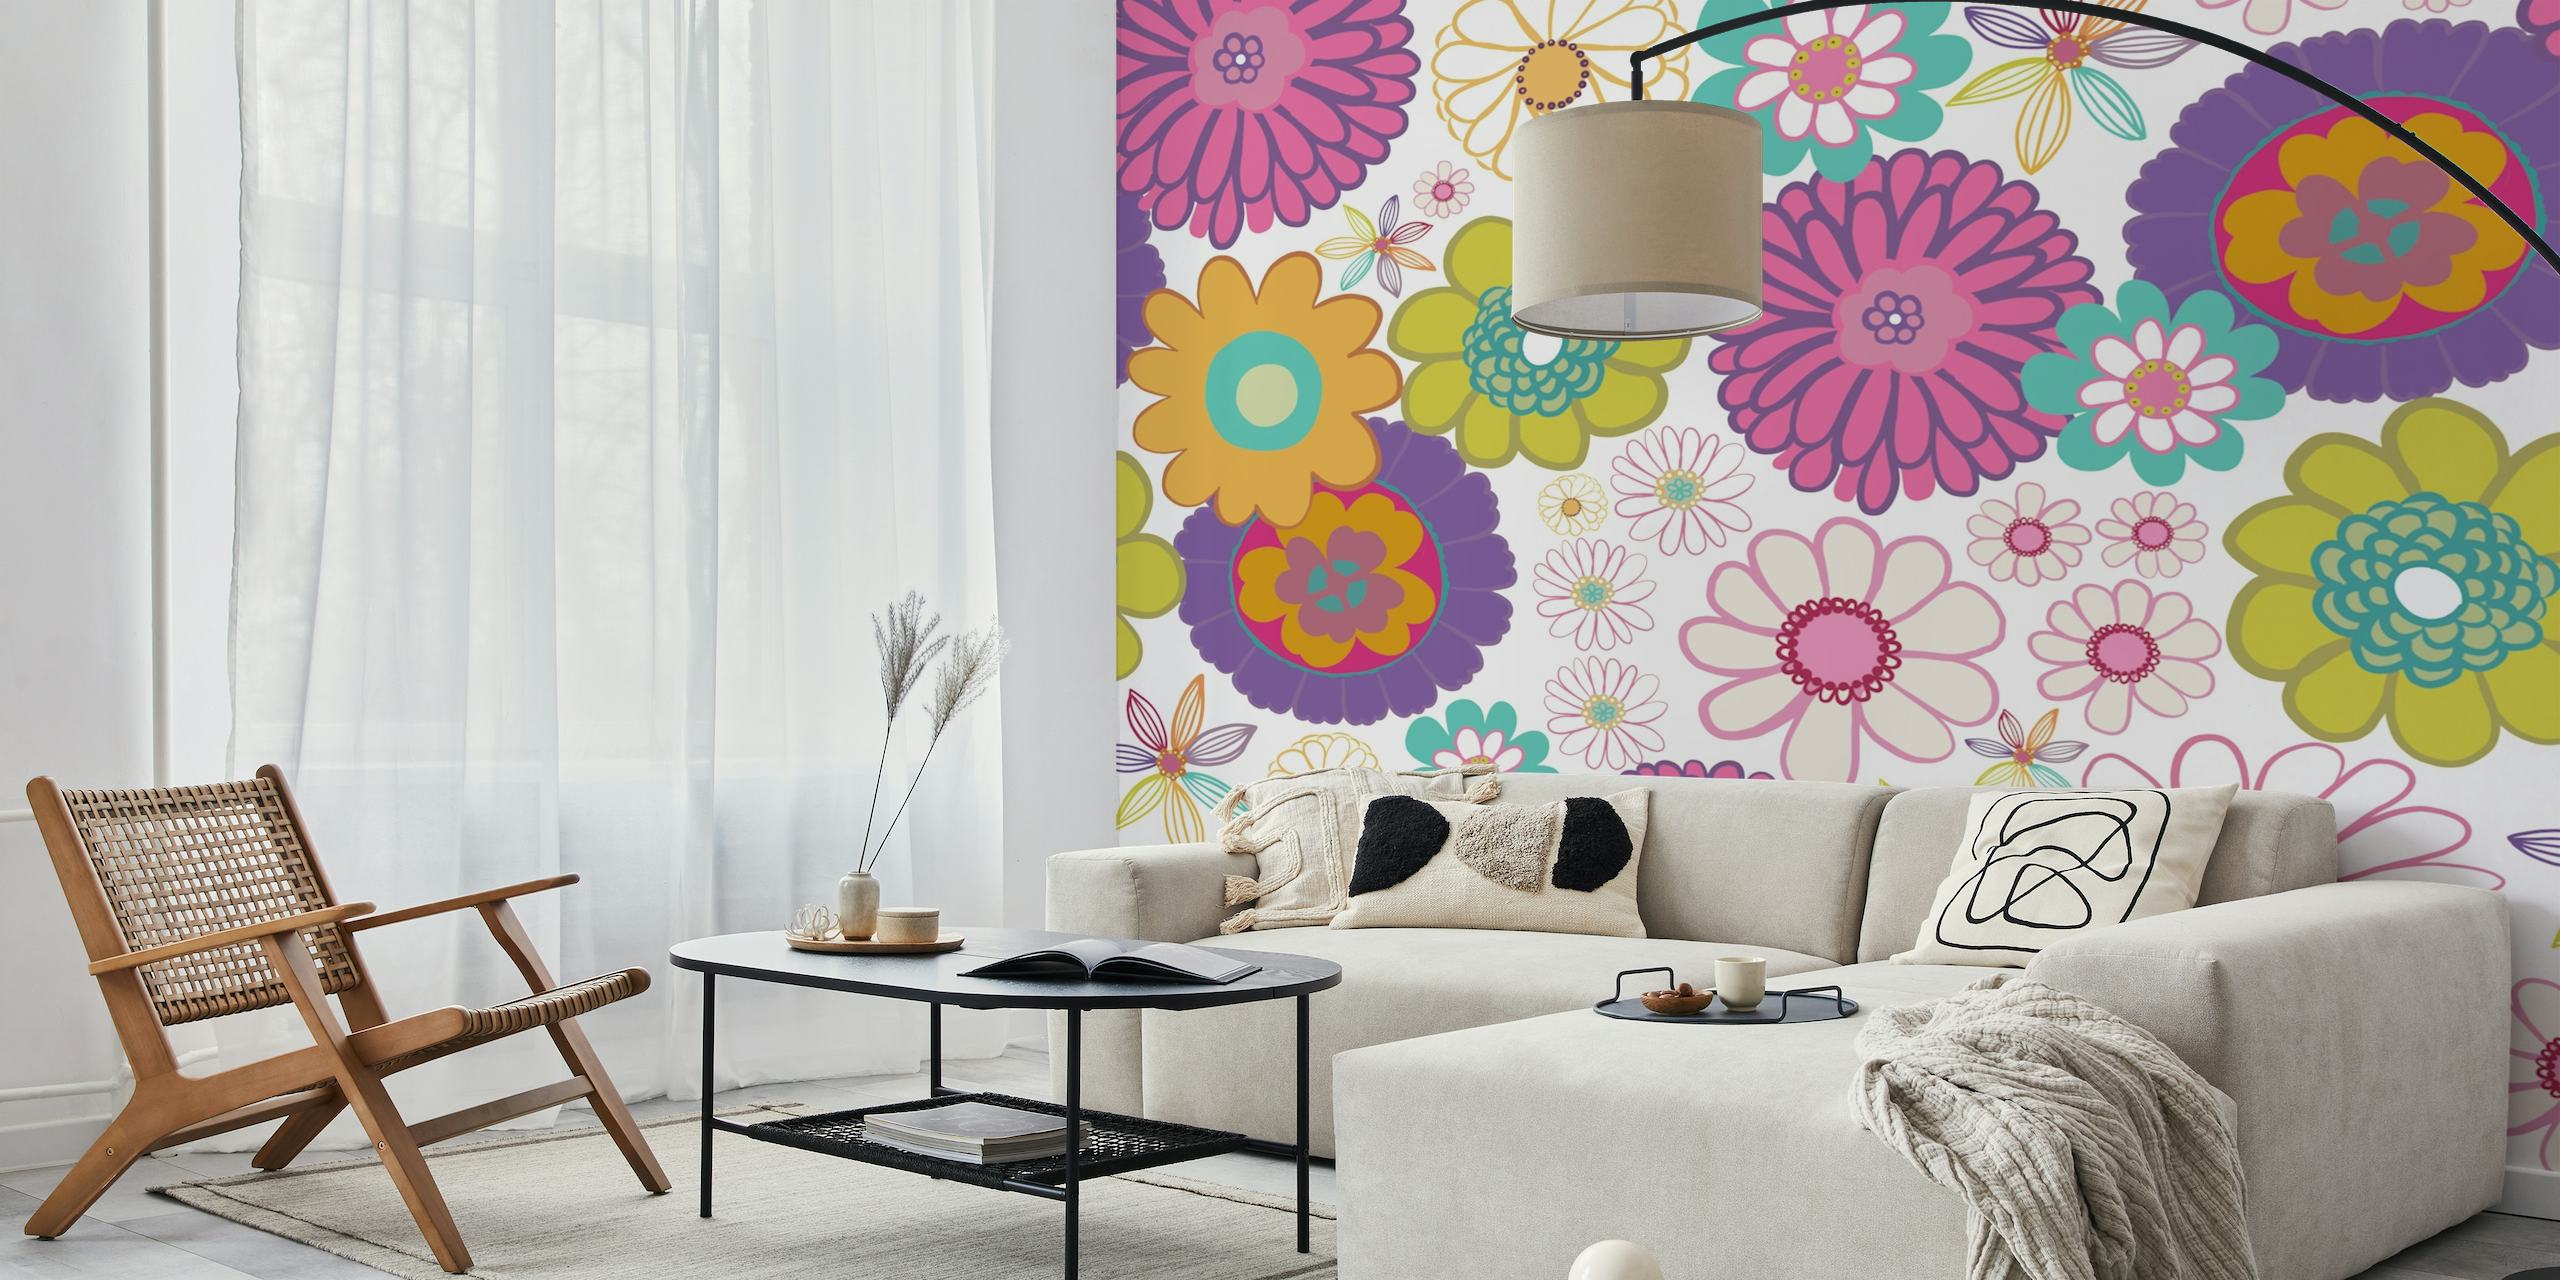 Colorful floral patterned wall mural with a mix of vintage and modern styles